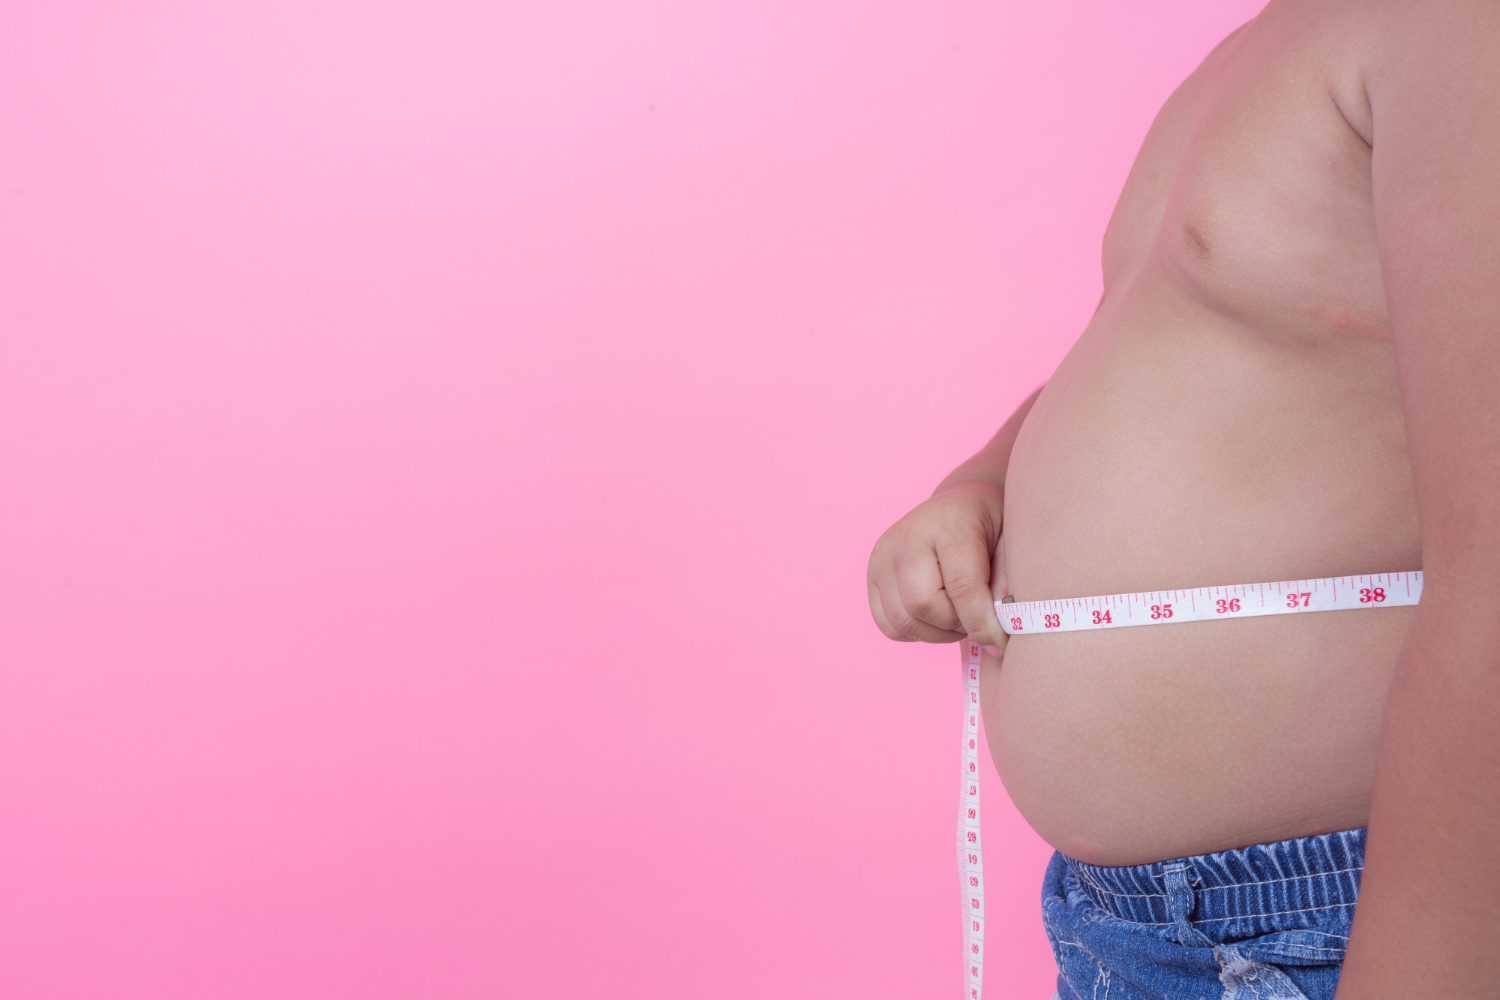 https://www.jornaldafranca.com.br/wp-content/uploads/2022/04/obese-boy-who-is-overweight-on-a-pink-background.jpg